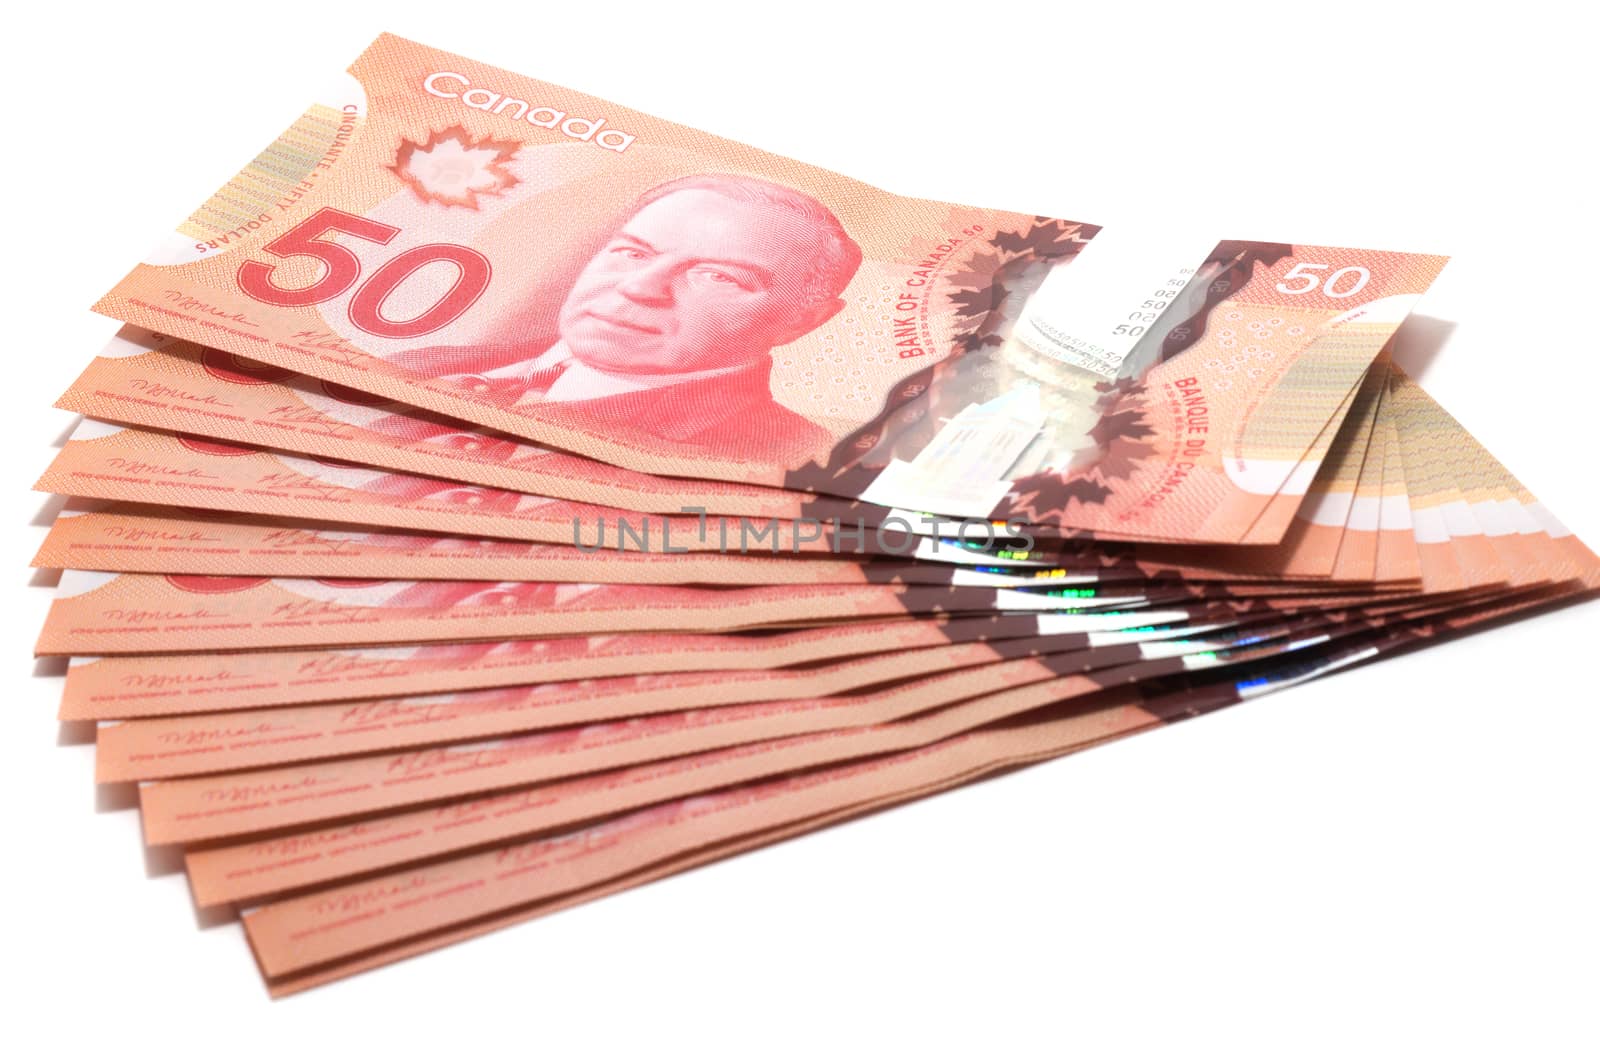 Selective focus of a series of 50 Canadian dollars on white background